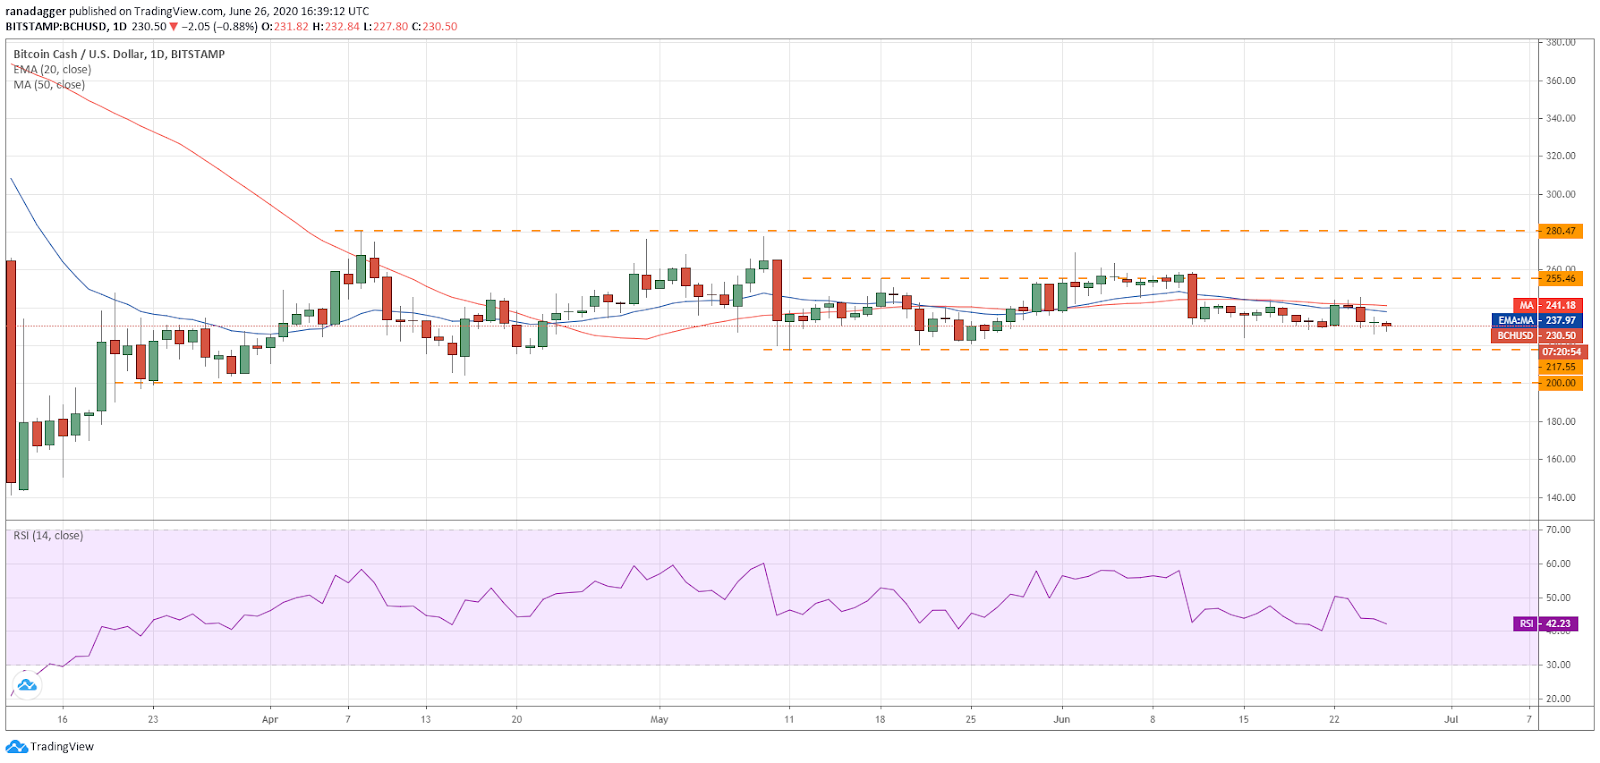 BCH/USD daily chart. Source: Tradingview​​​​​​​